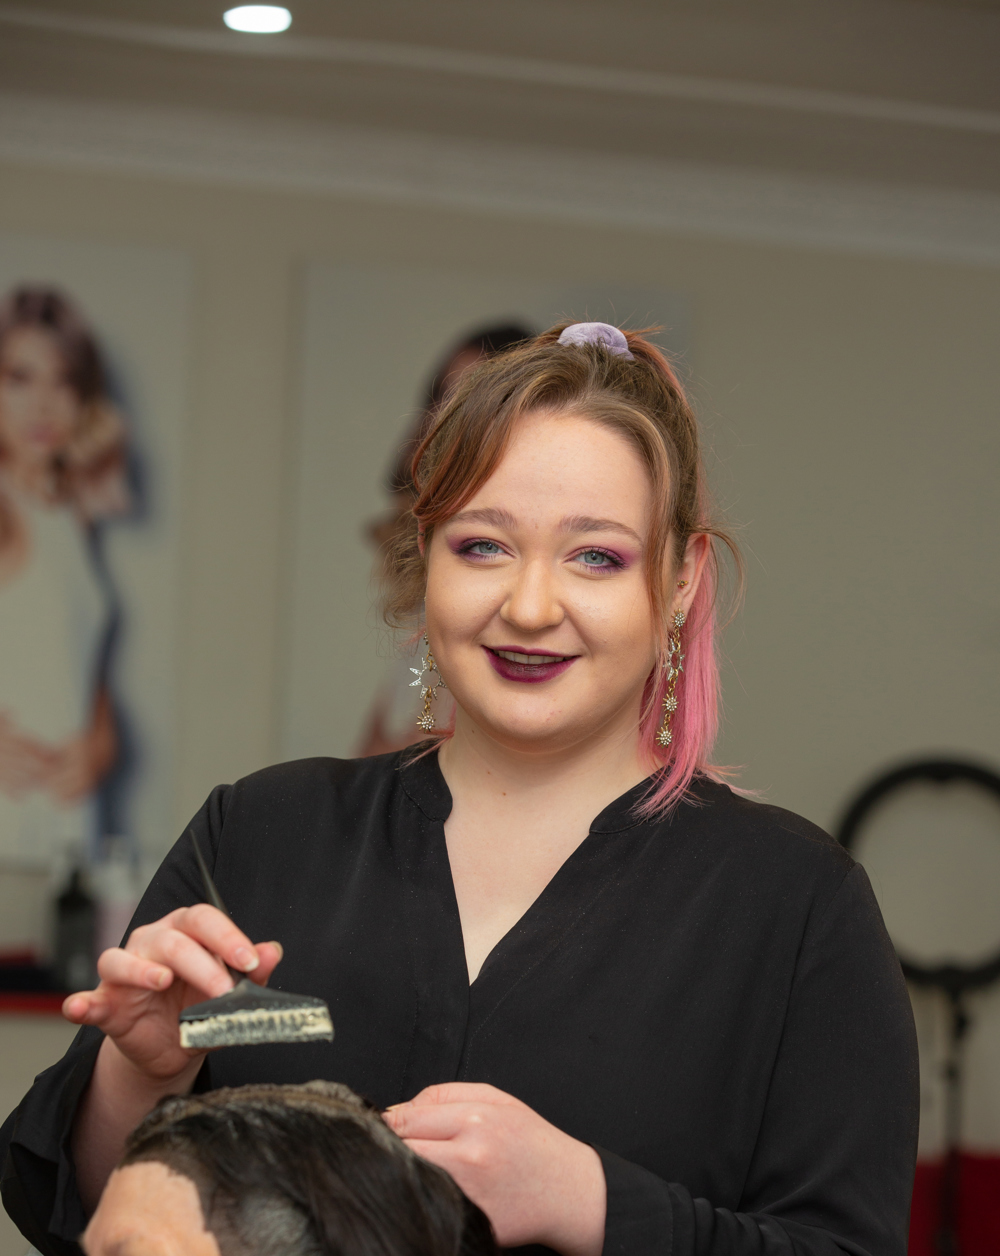 Marly followed her passion into a hairdressing apprenticeship